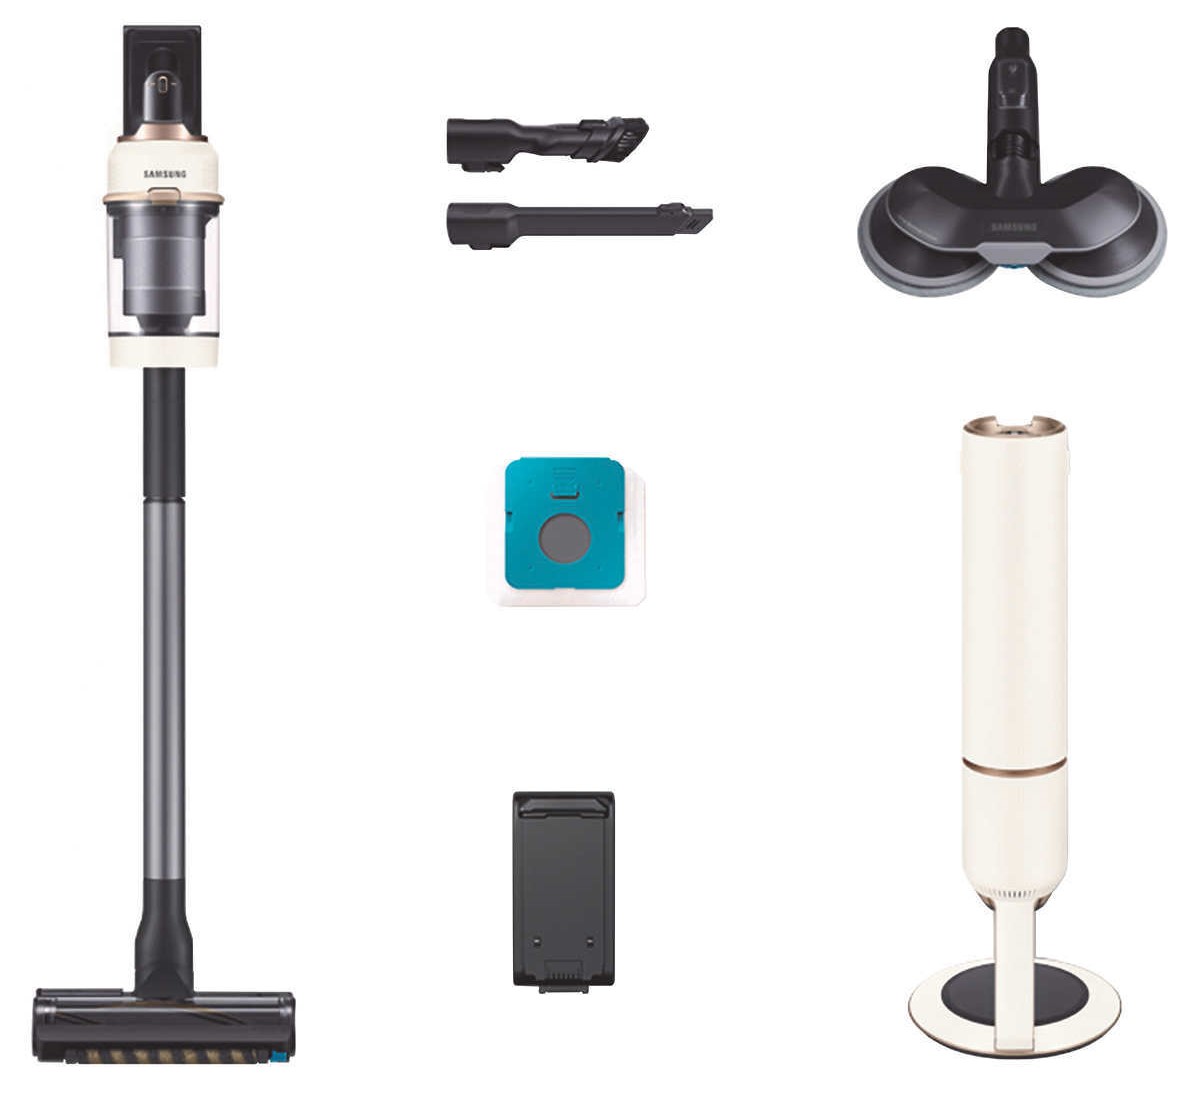 Costco Samsung Bespoke Jet Cordless Stick Vacuum with All-in-One Clean Station